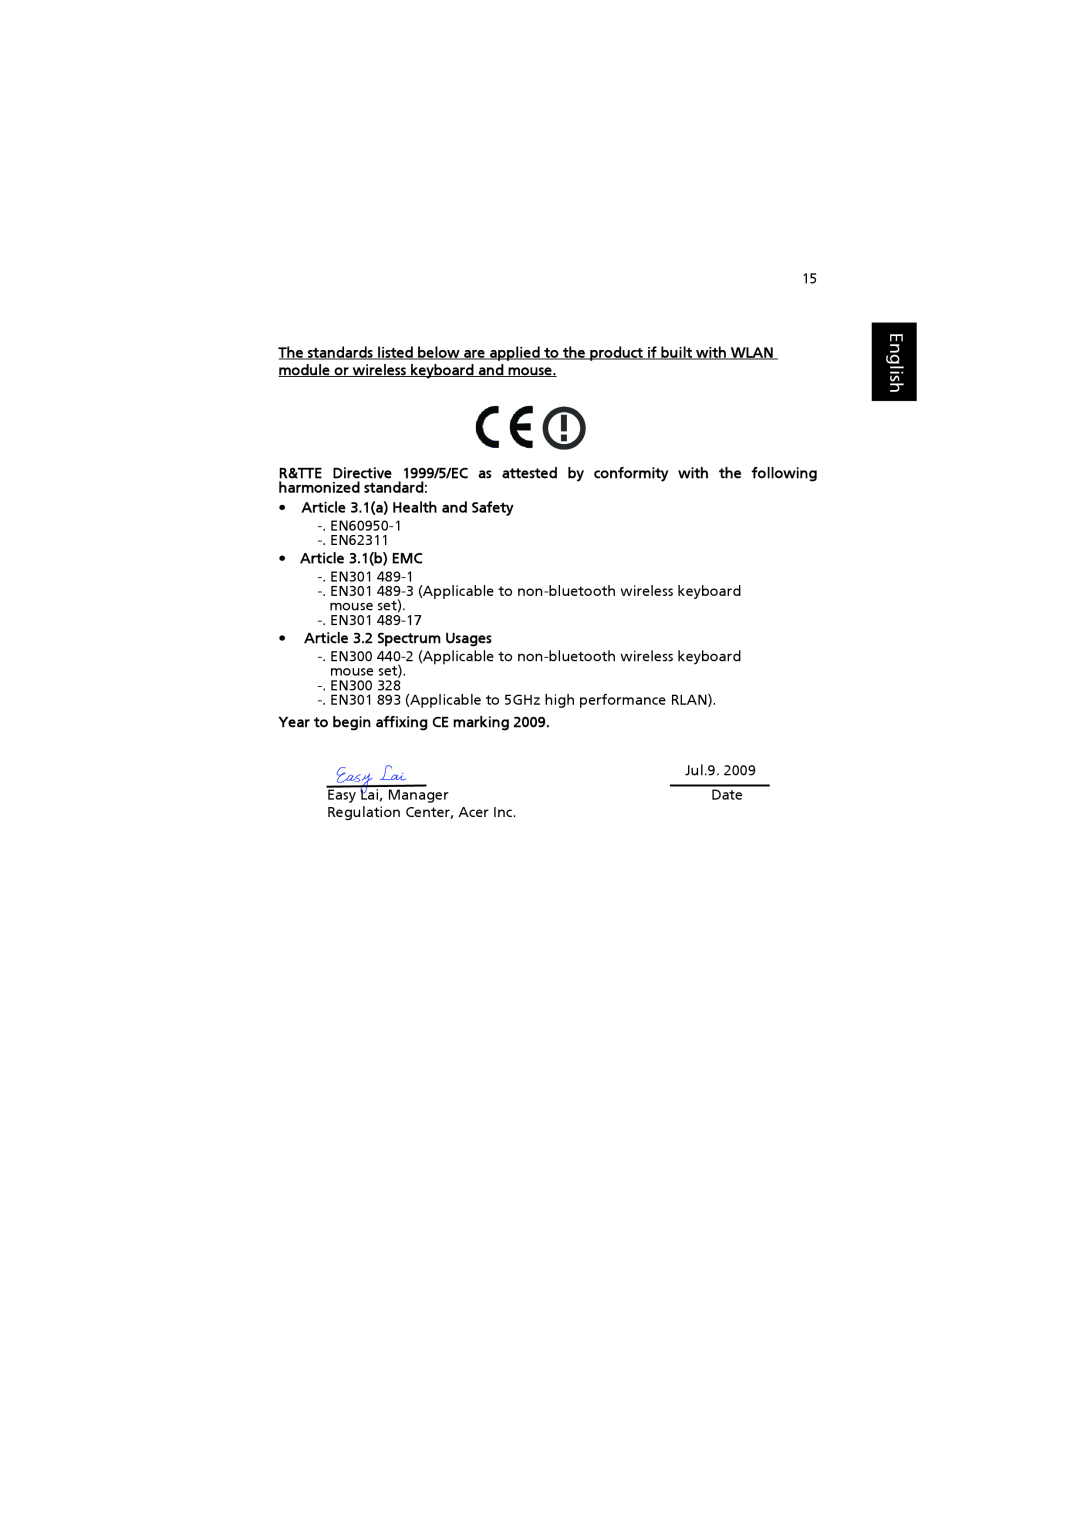 Acer X1300, AS001 manual English, Article 3.1a Health and Safety 